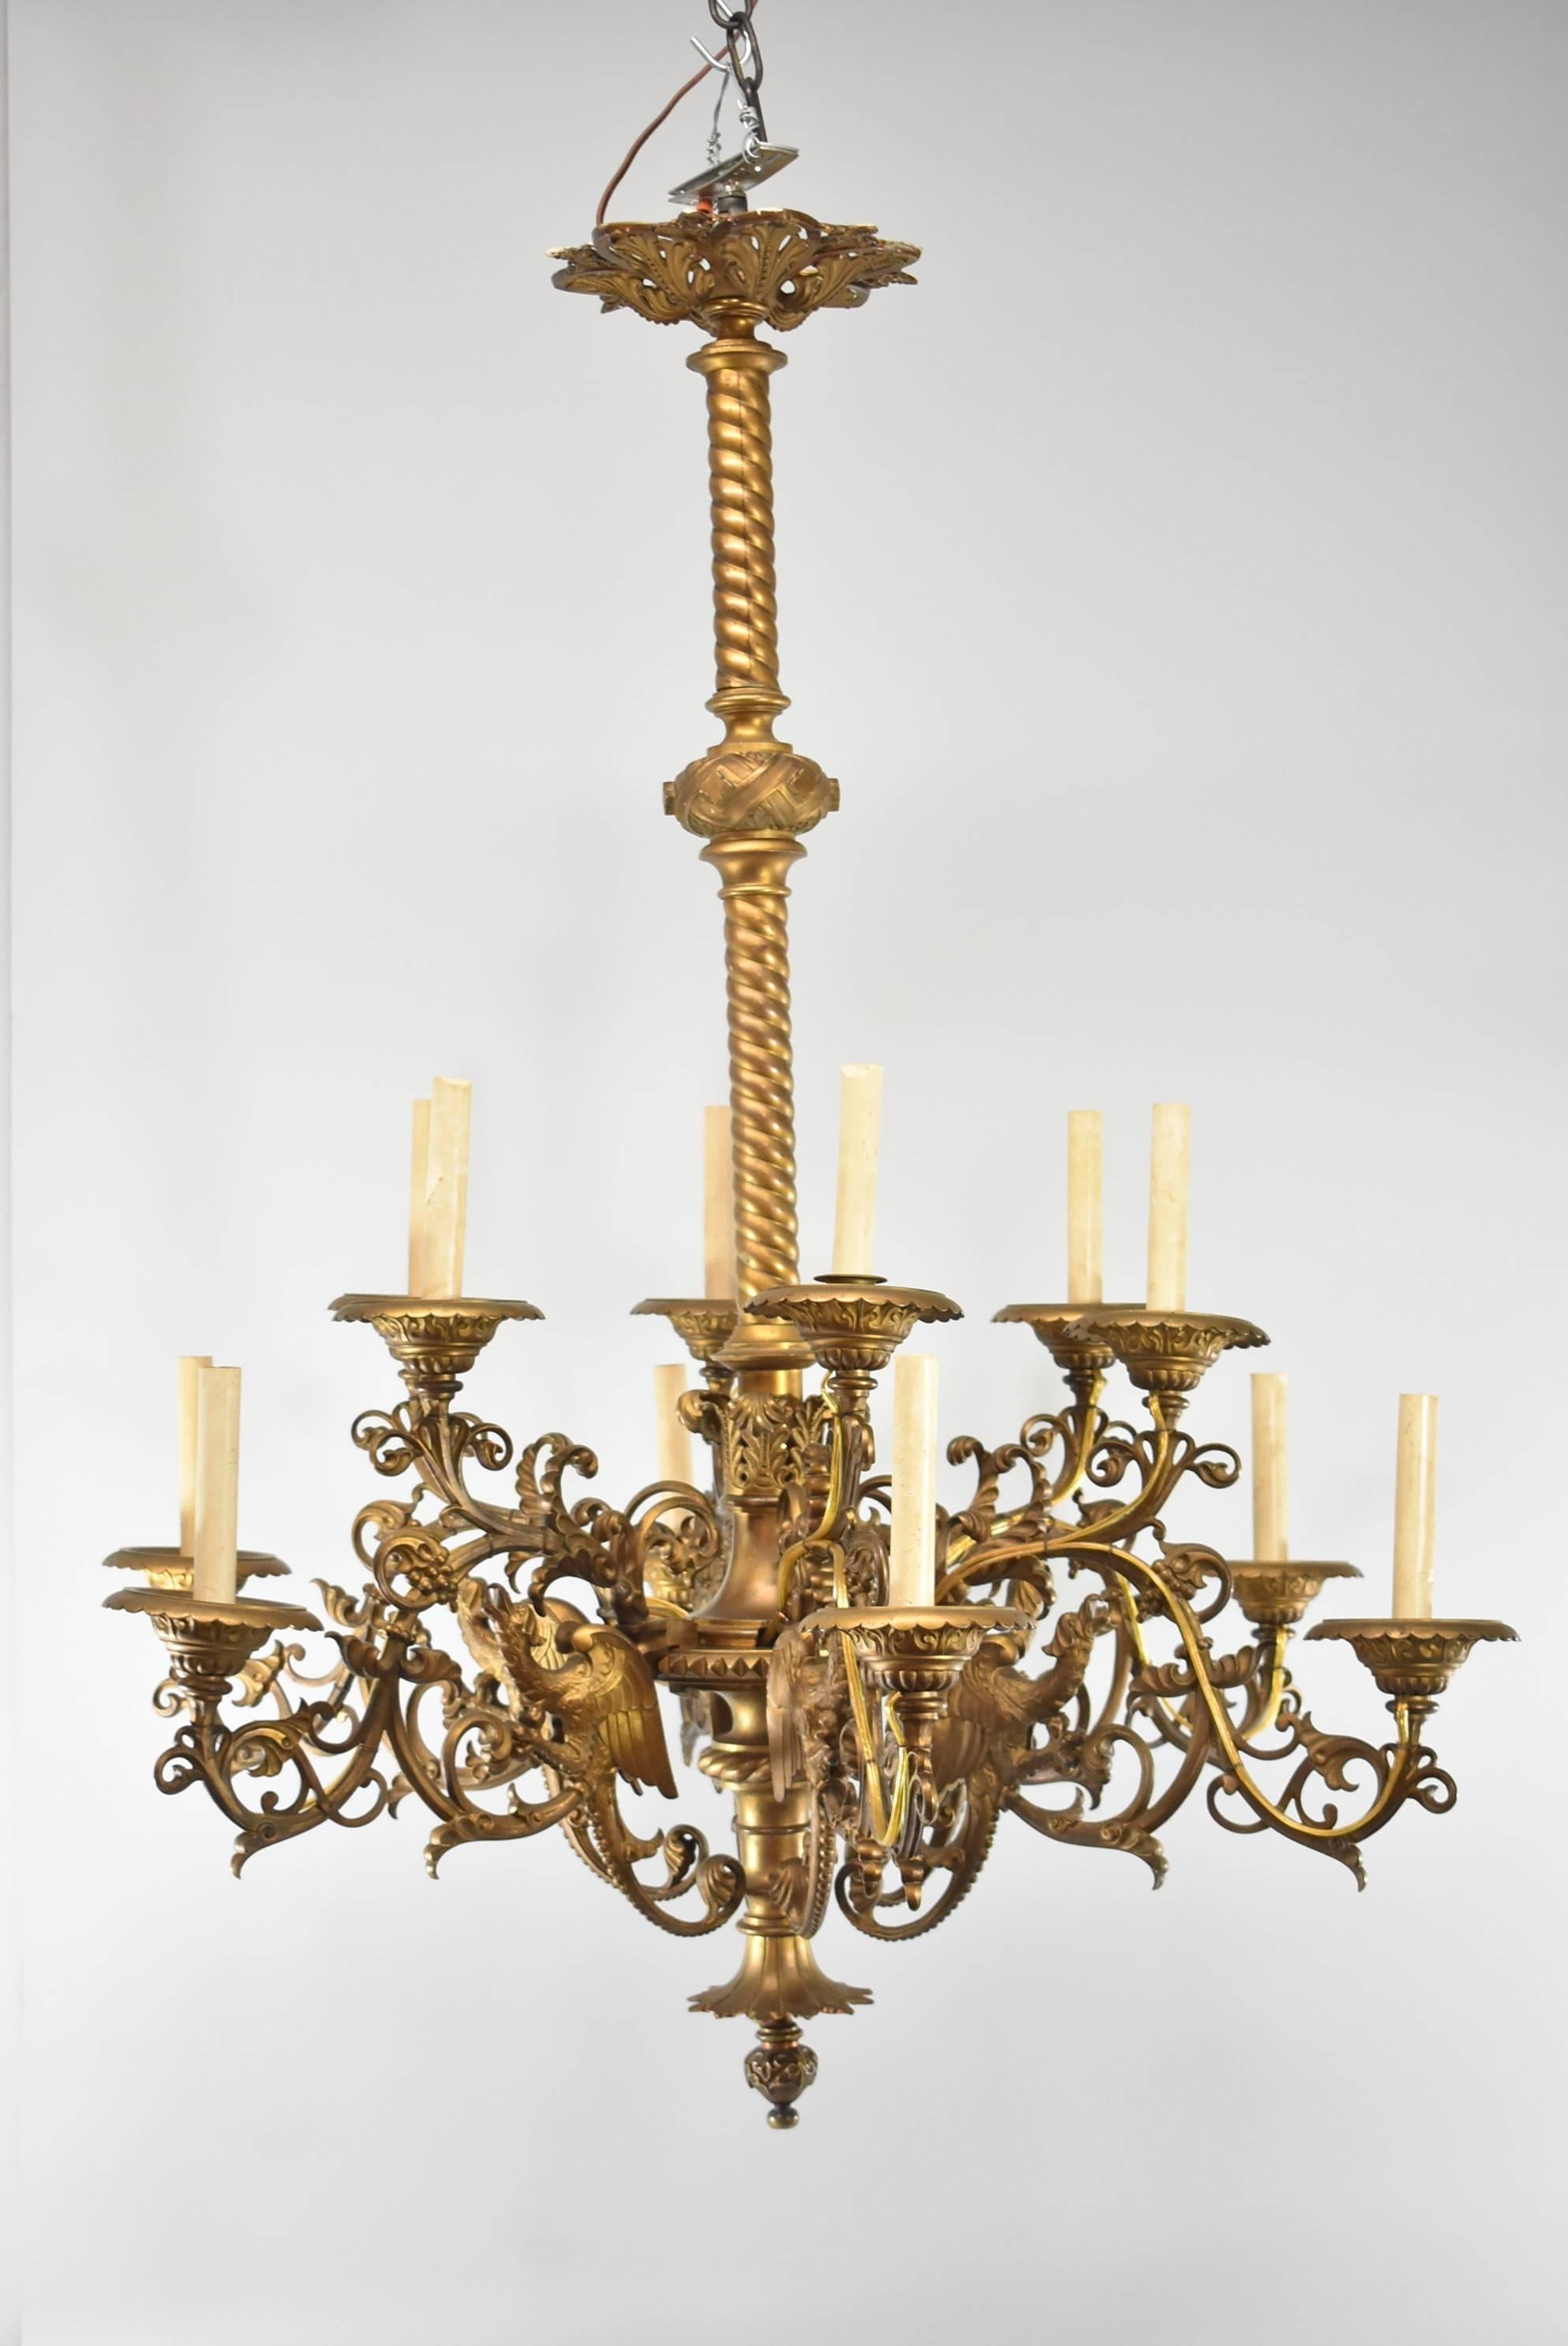 A stunning large-scale bronze with a gold doré finish chandelier. It features six arms with a total of 12 lights. Each scroll arm has a mythical winged bird and grape detail. It has a twisted rope centre. Sure to make a statement in any home.